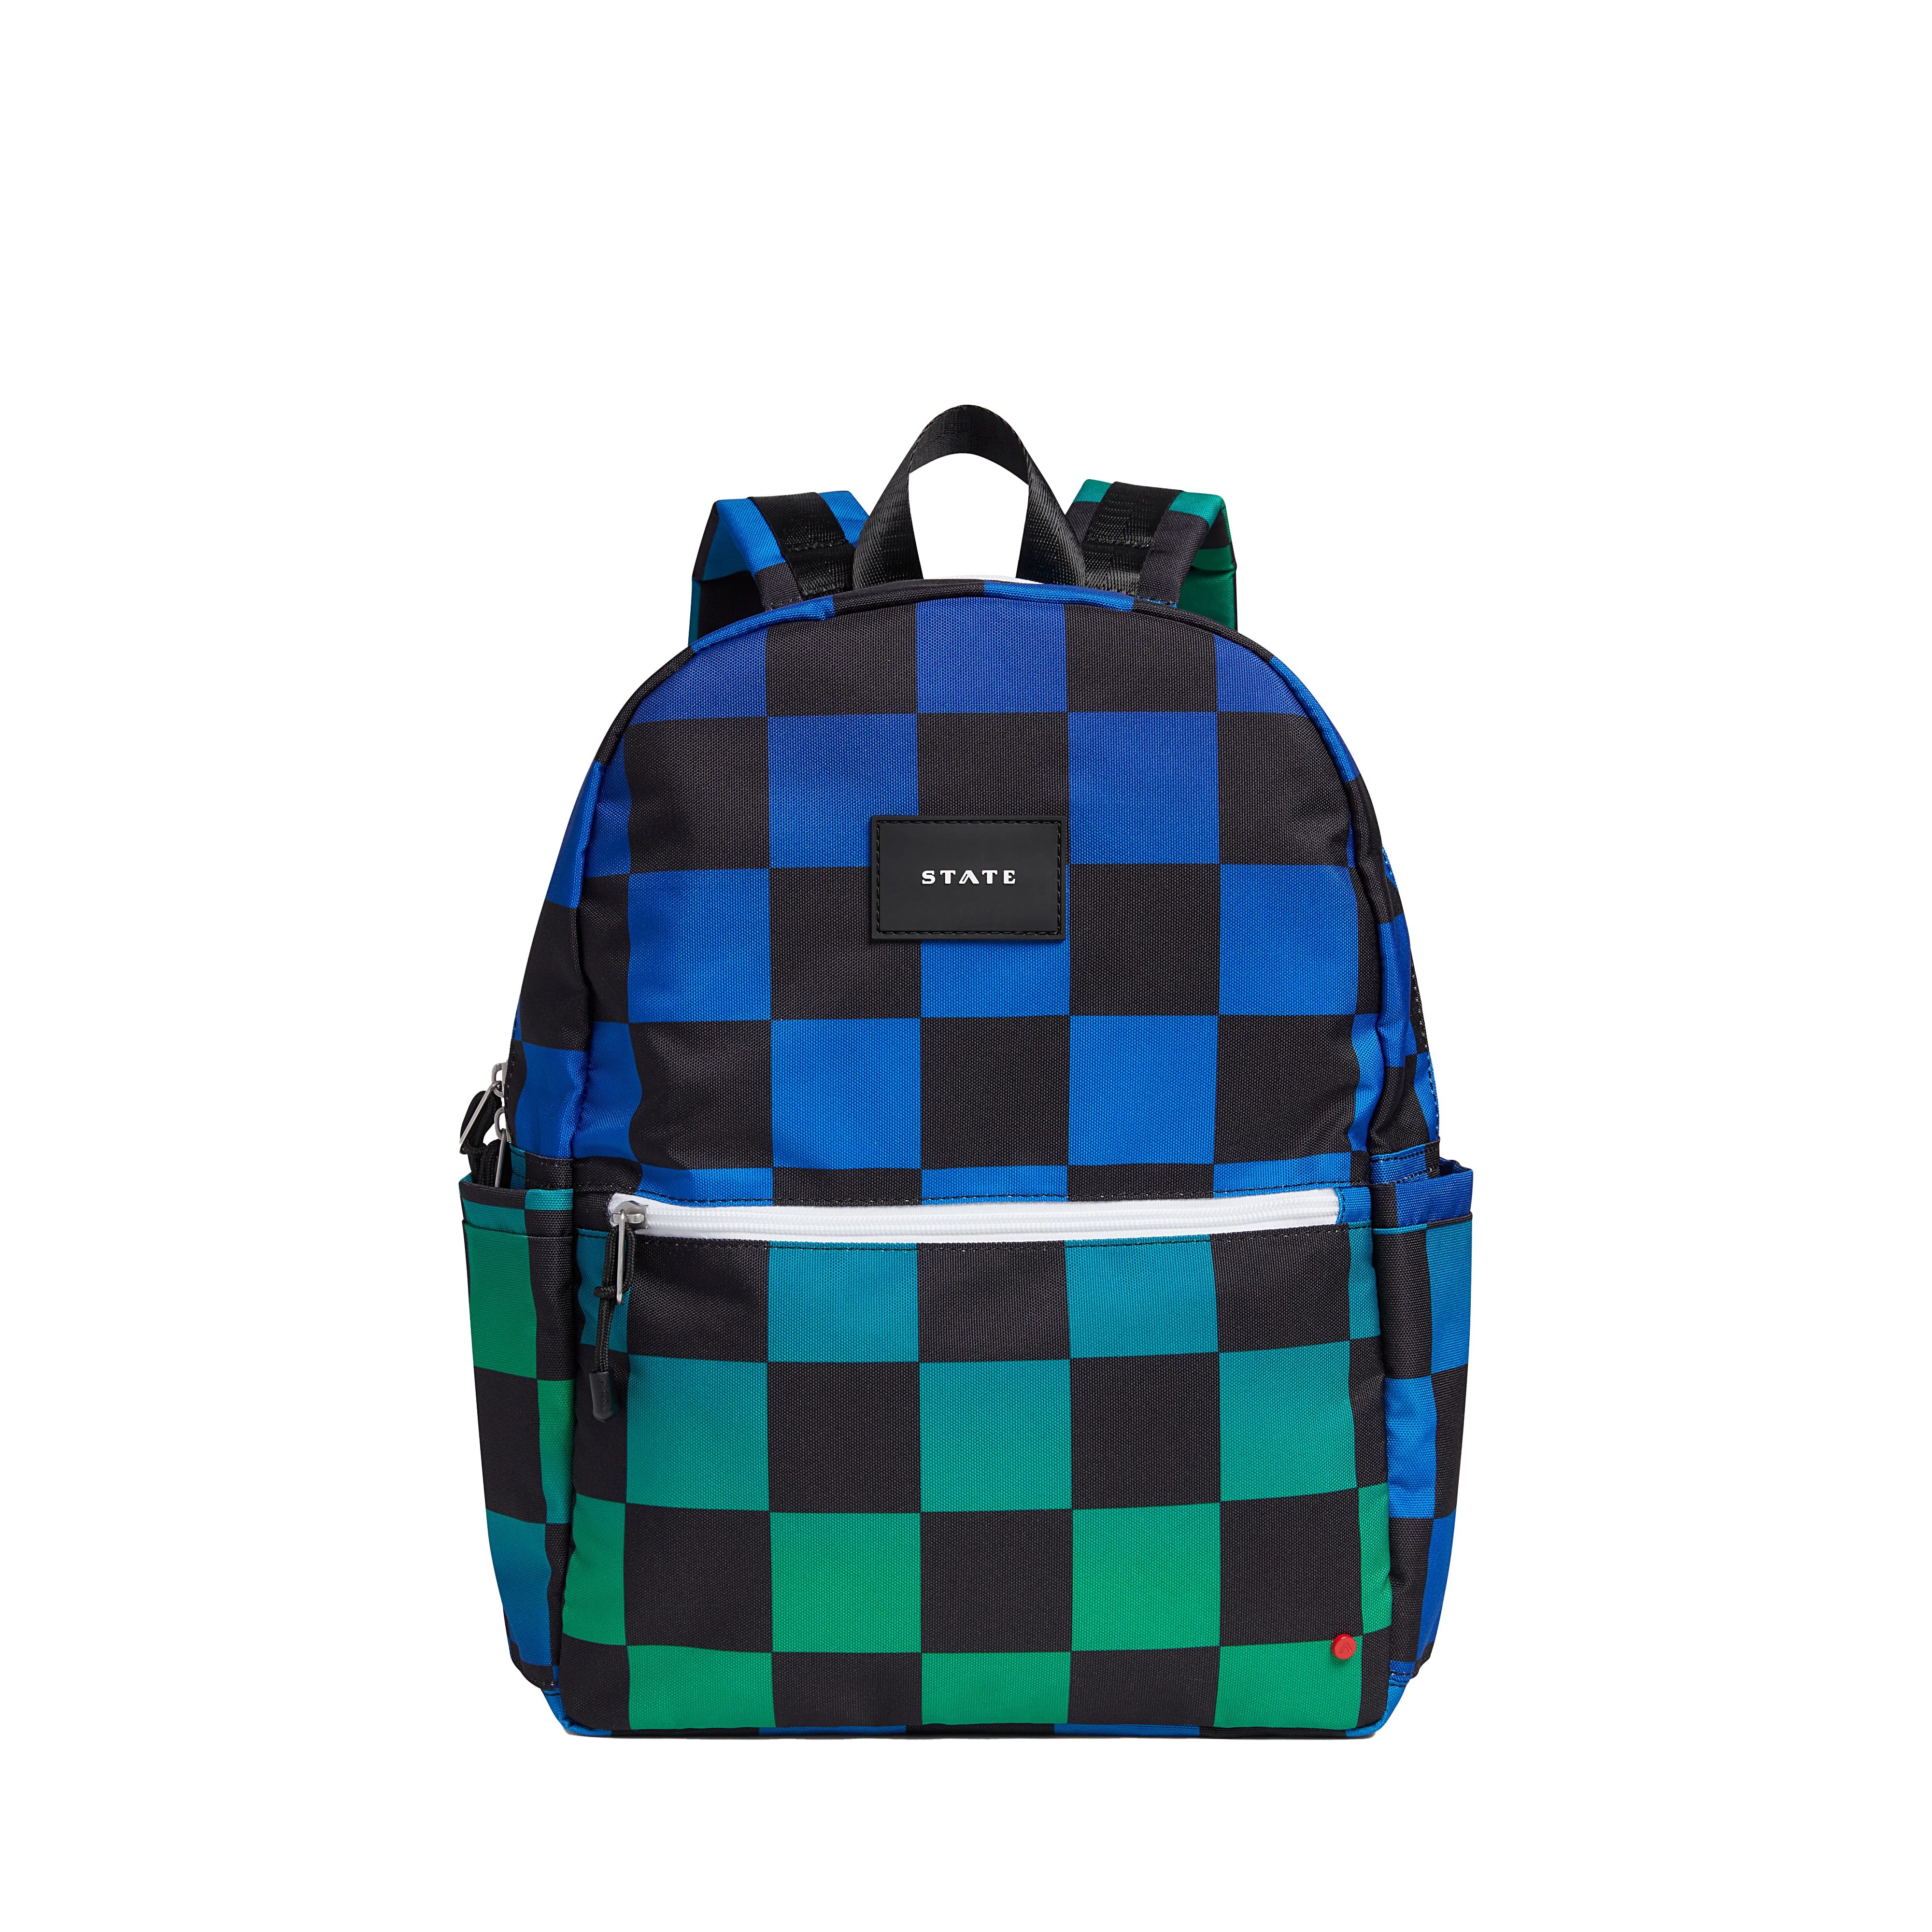 STATE Bags | Kane Double Pocket Backpack Recycled Poly Canvas Blue Checkerboard | STATE Bags